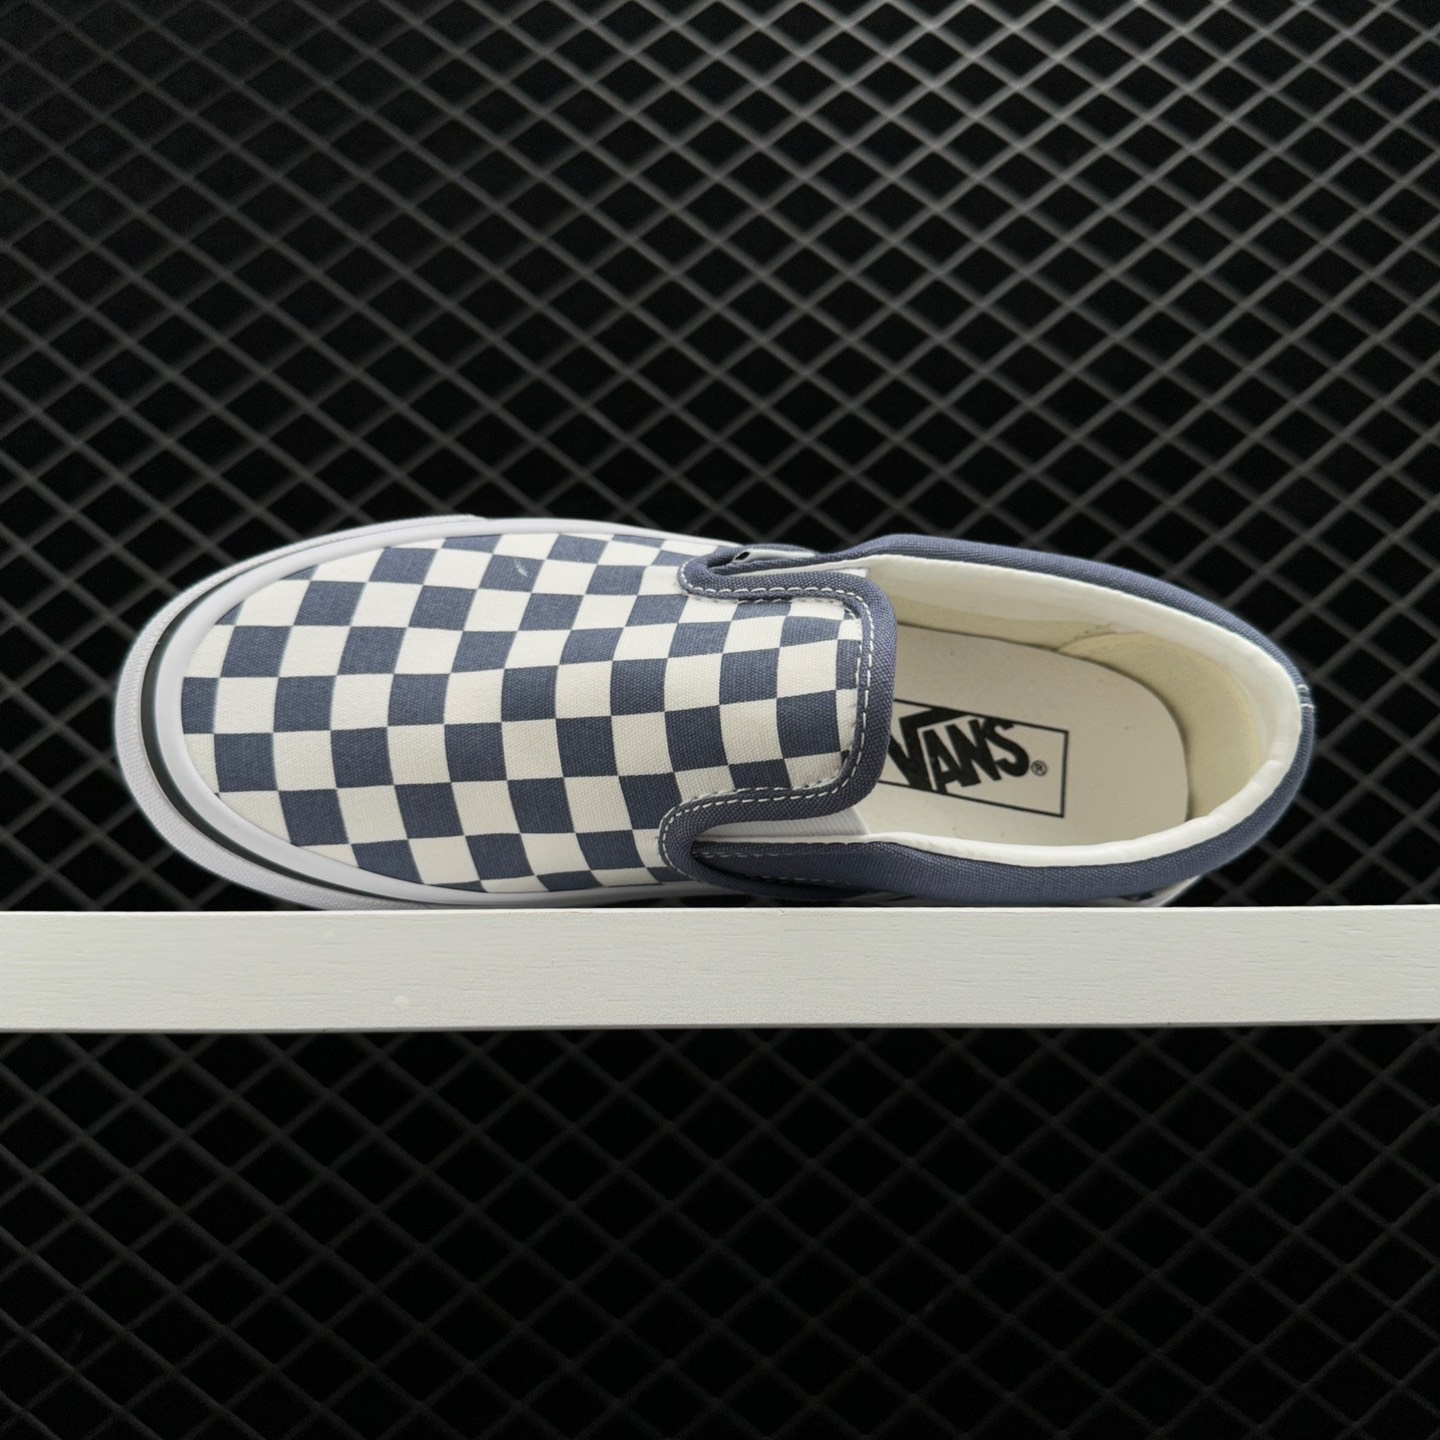 Vans Checkerboard Slip-On 'Blue White' VN0A7Q5DRV2 - Stylish and Comfortable Slip-On Shoes